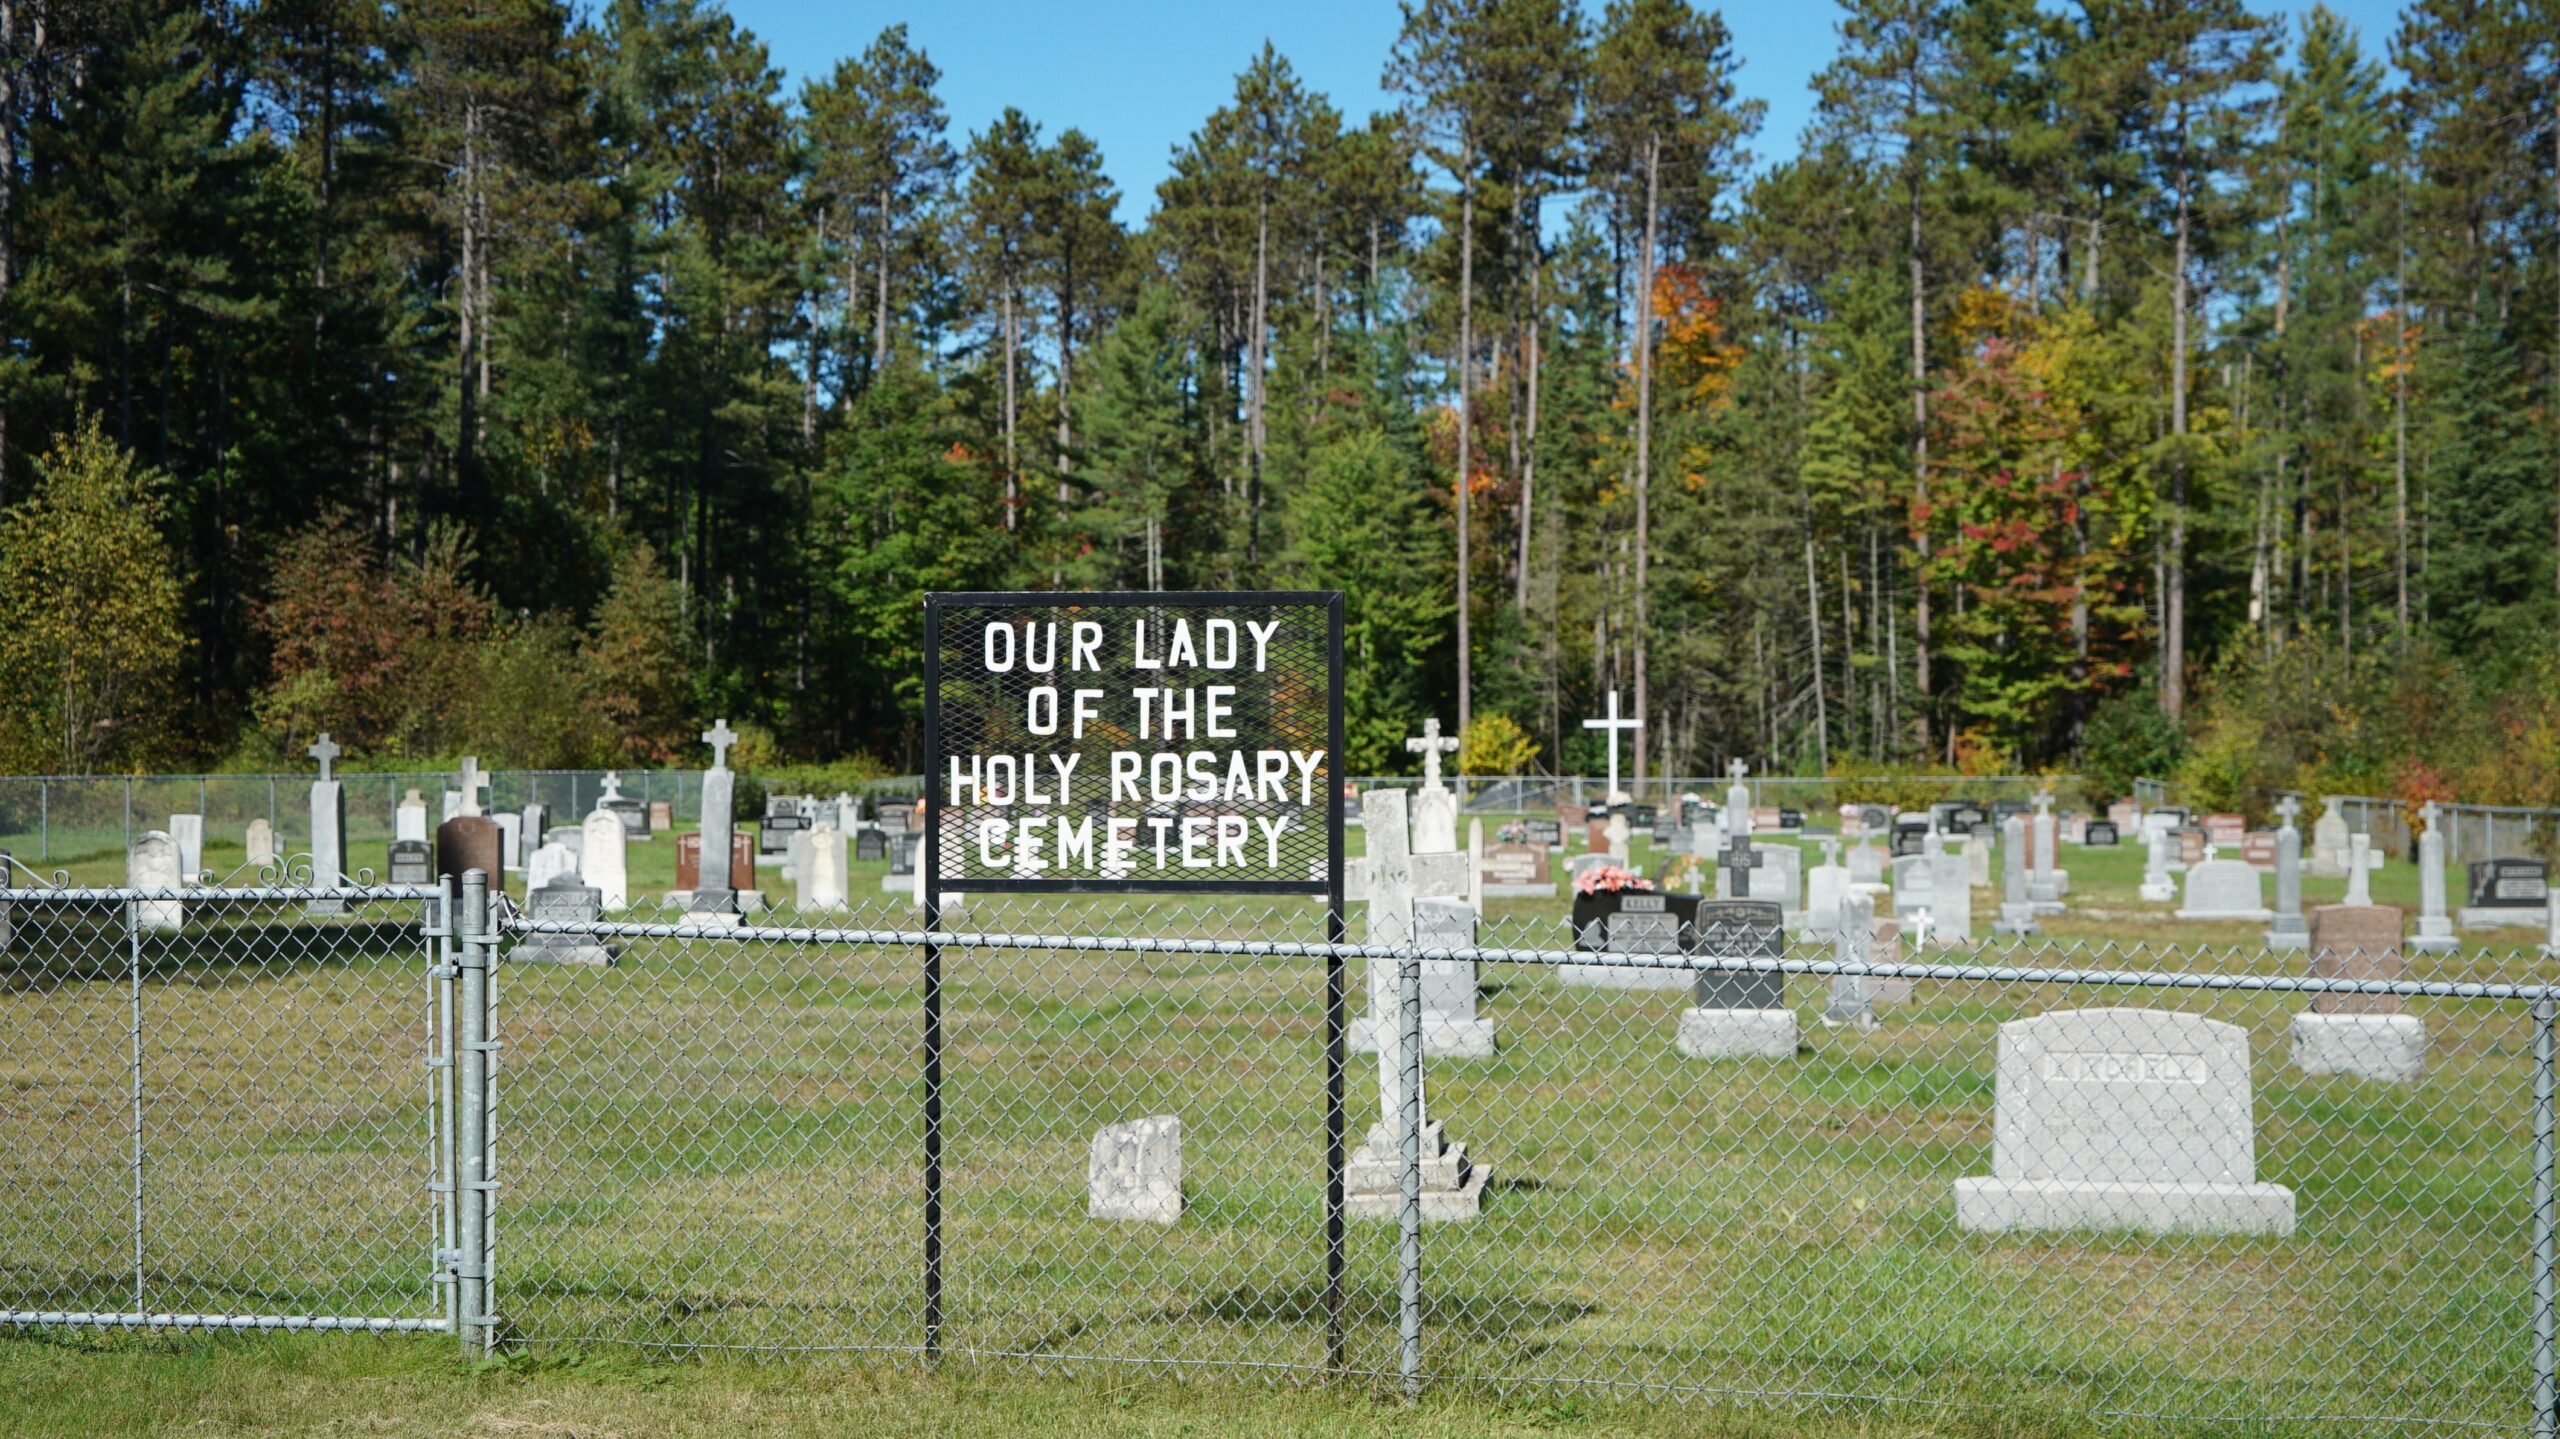 Our Lady of the Holy Rosary Cemetery in Griffith Otario